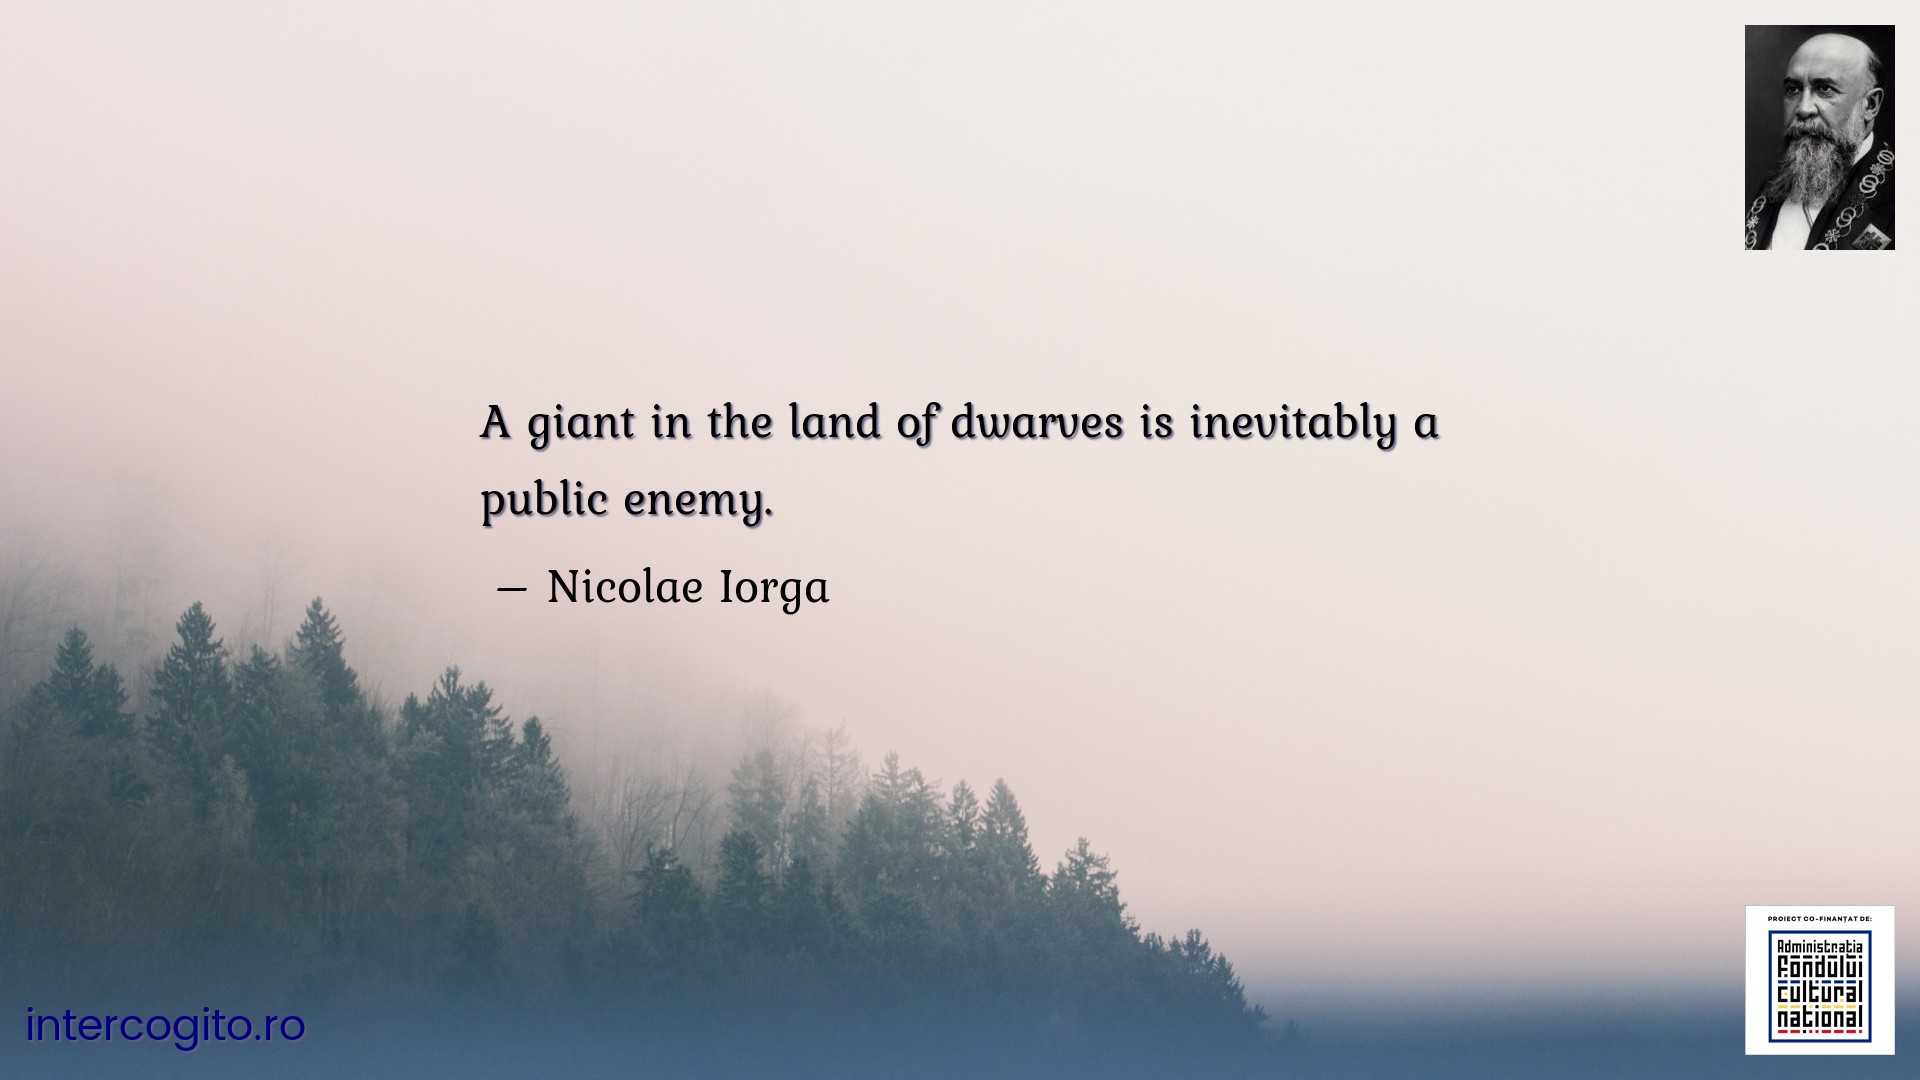 A giant in the land of dwarves is inevitably a public enemy.